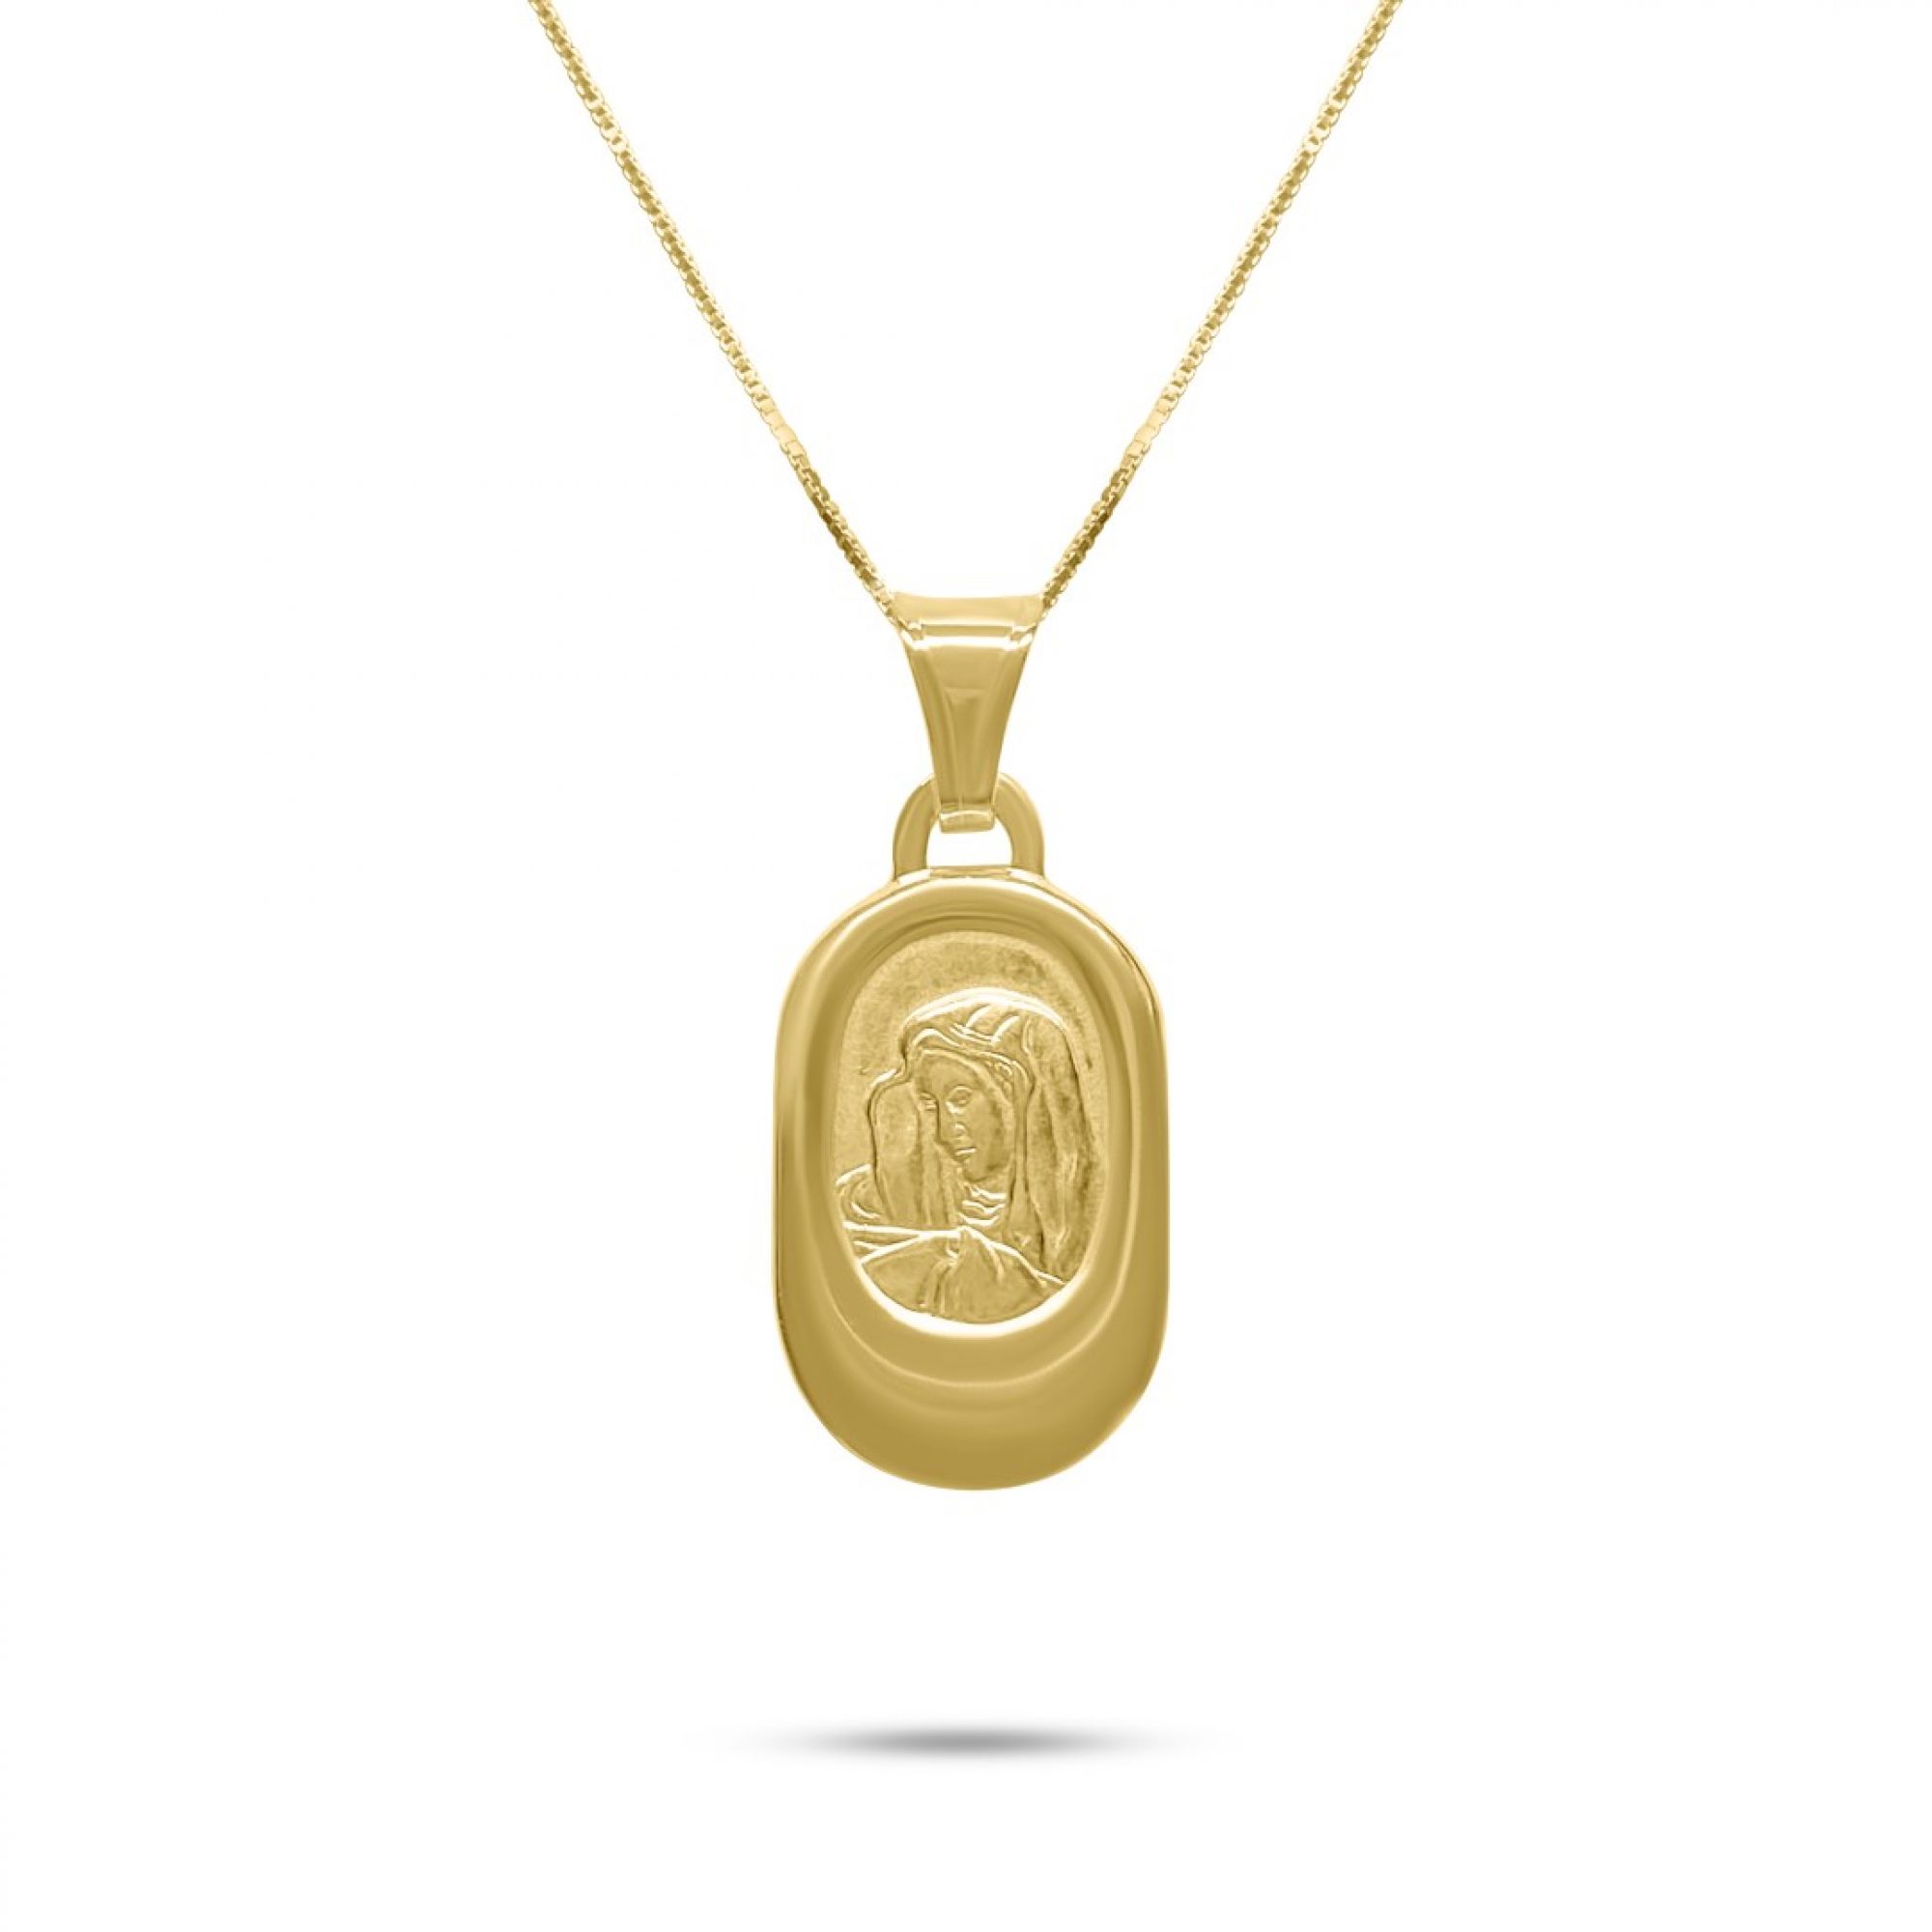 Virgin Mary gold plated necklace